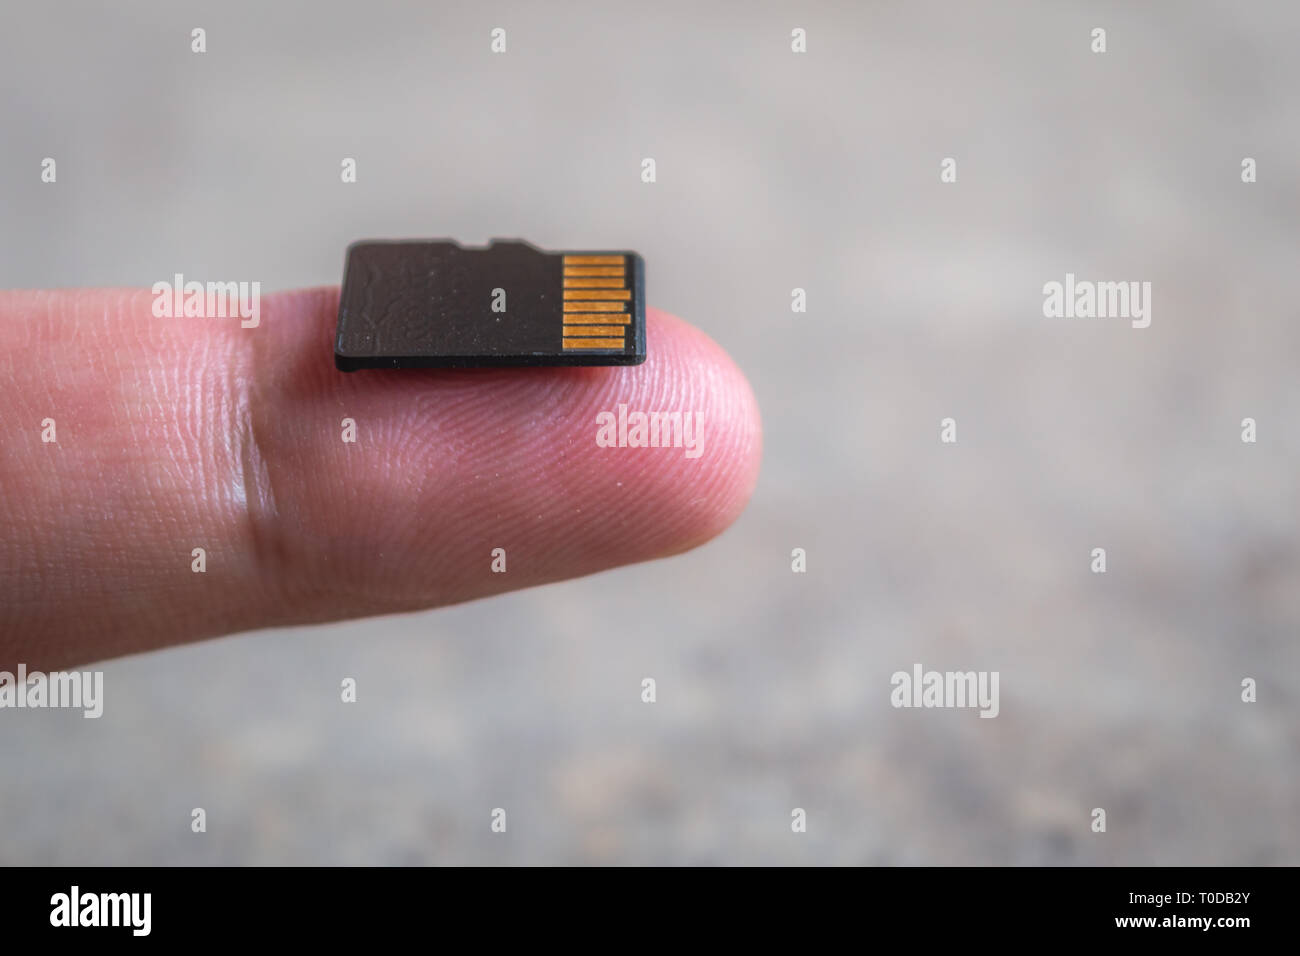 A Micro SD Memory Card compared to the size of a finger Stock Photo - Alamy